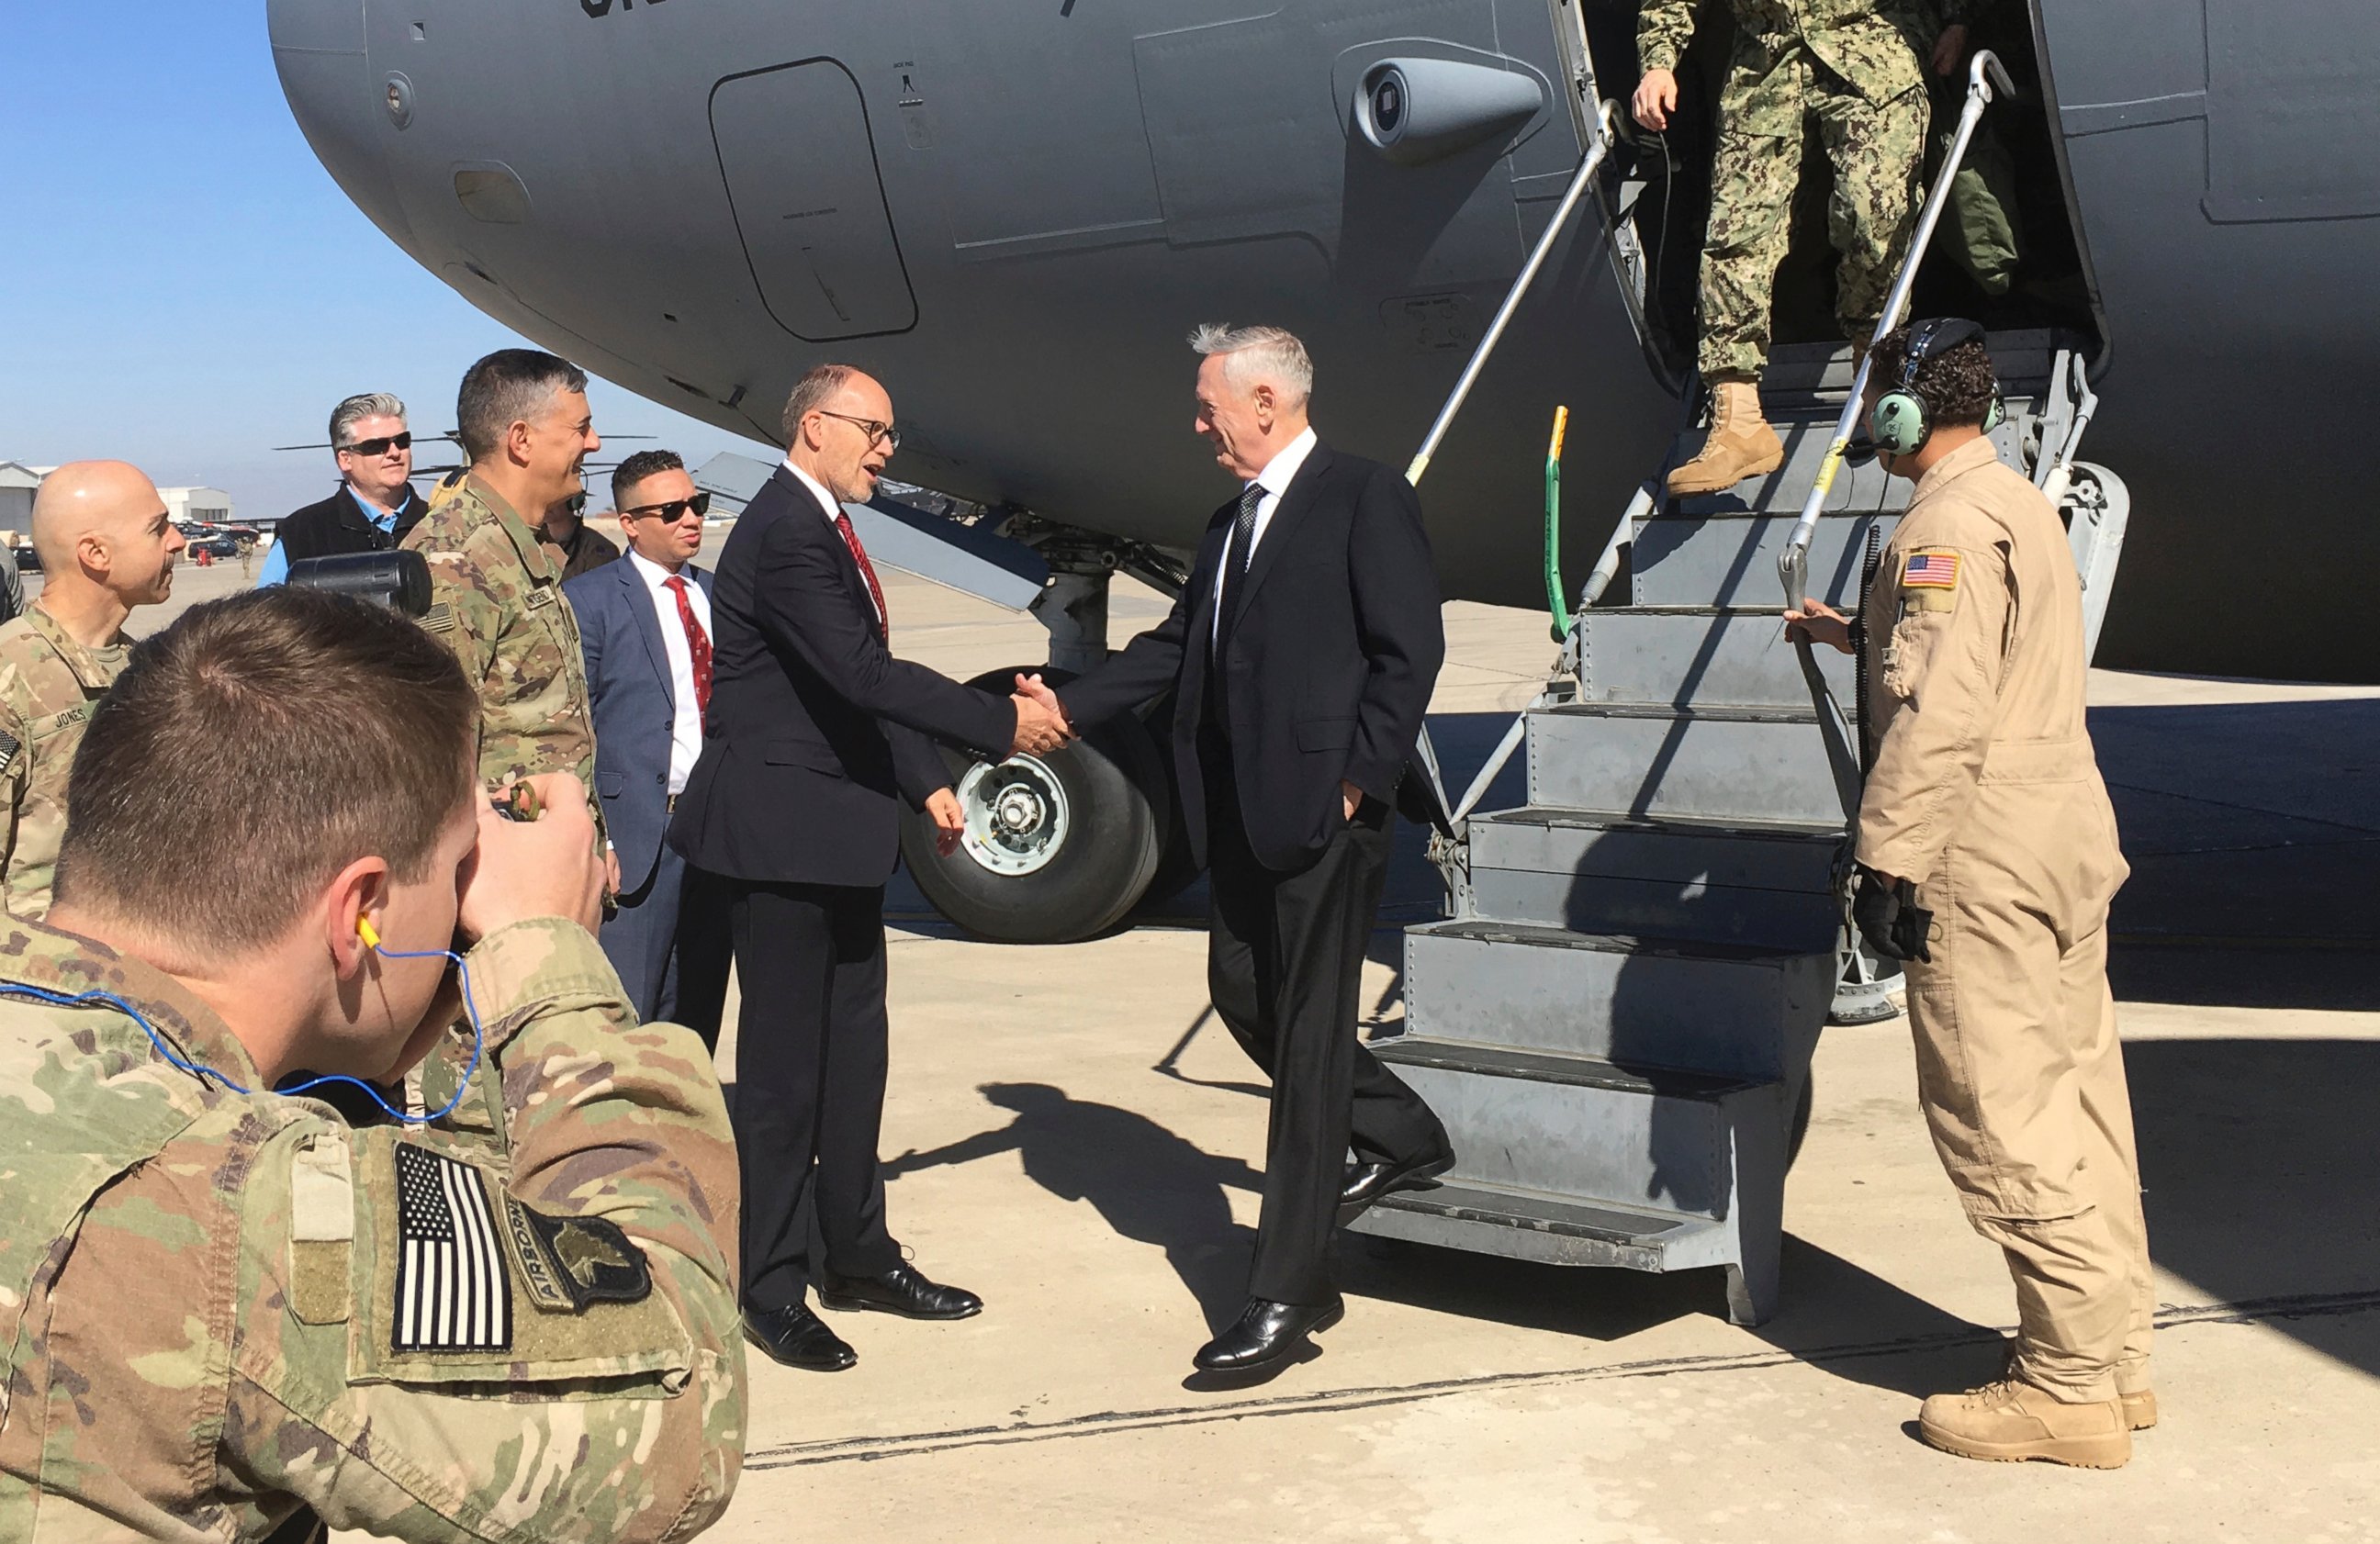 PHOTO: U.S. Sec. of Defense Jim Mattis, center, is greeted by U.S. Ambassador Douglas Silliman as he arrives at Baghdad International Airport on an unannounced trip Monday, Feb. 20, 2017. 